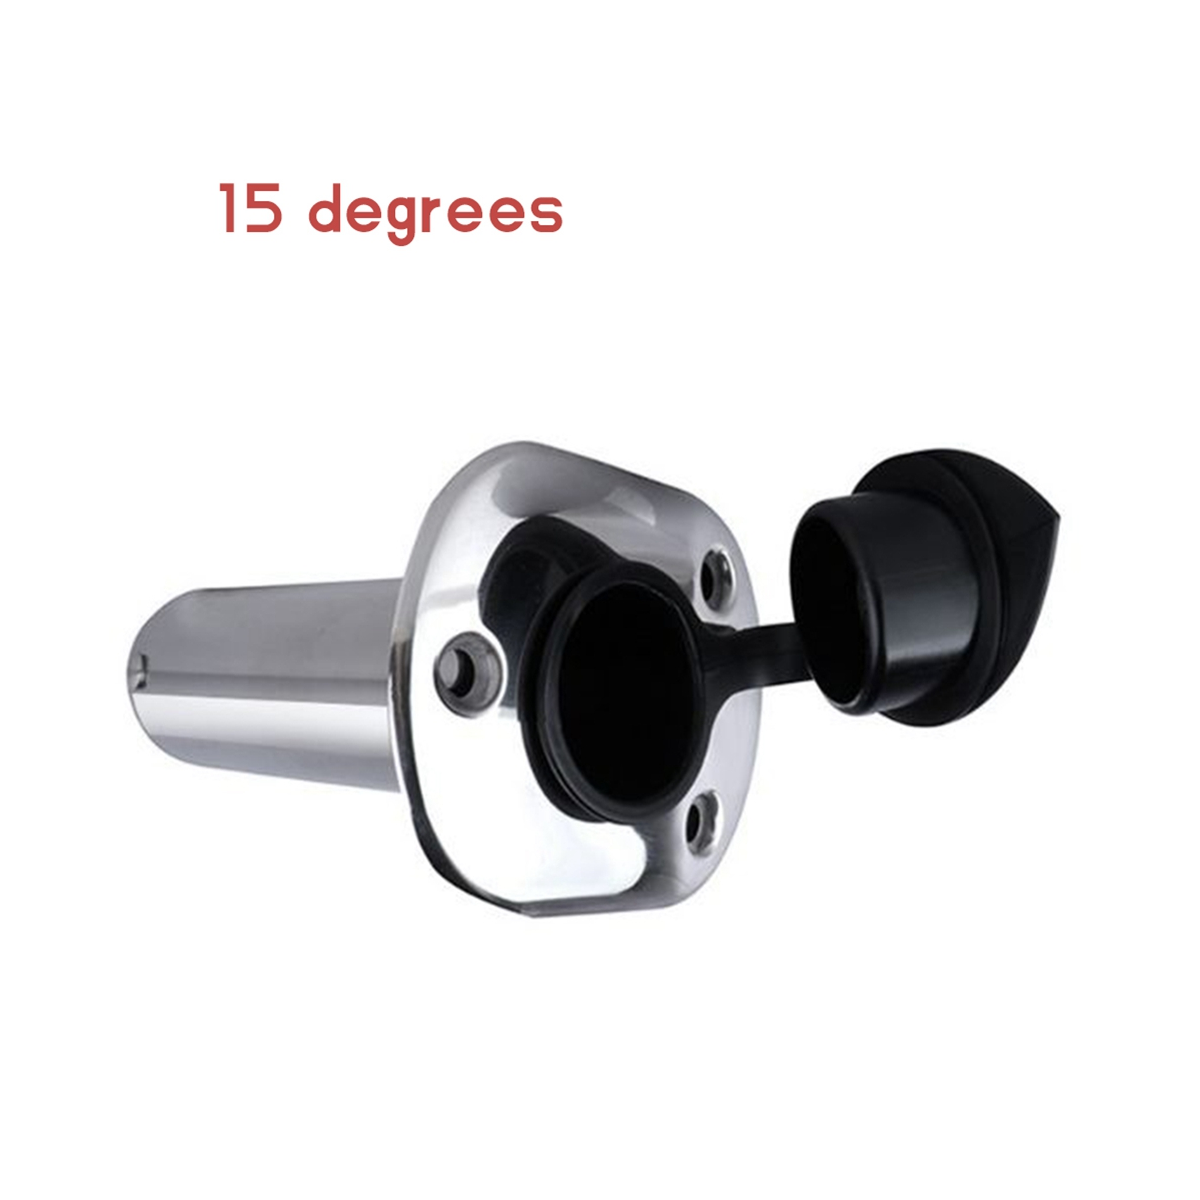 Fishing Pole Stand Stainless Steel Embedded Mount Fishing Rod Holder For Boat  Accessories Marine